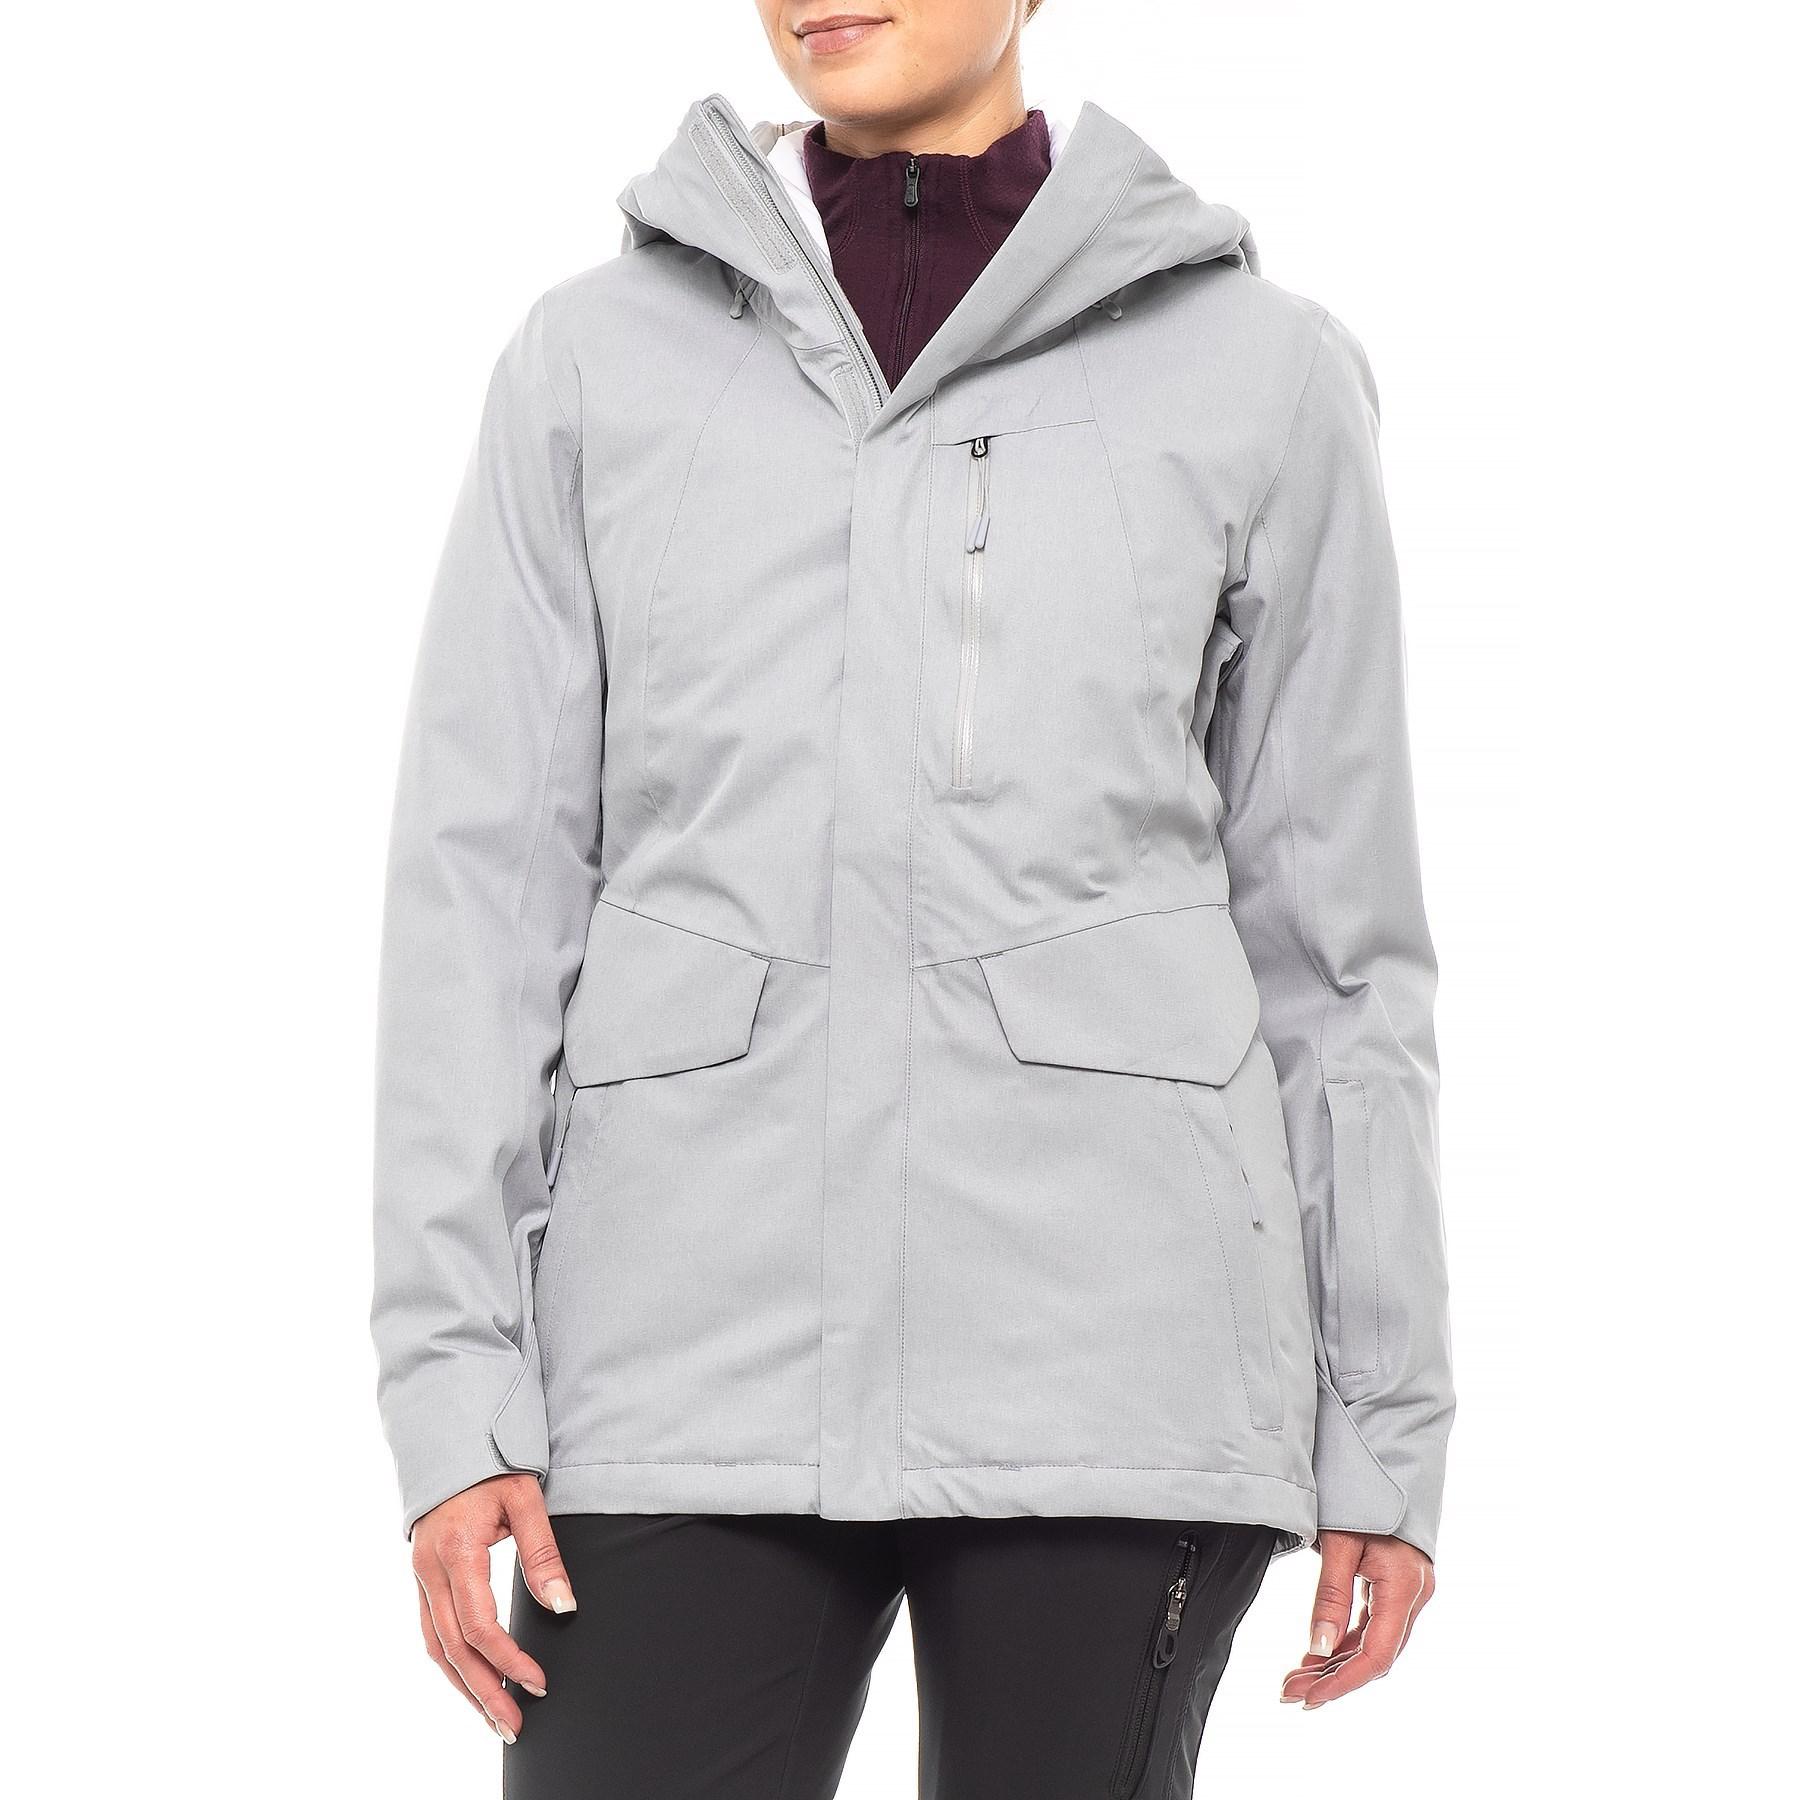 north face tri weather jacket